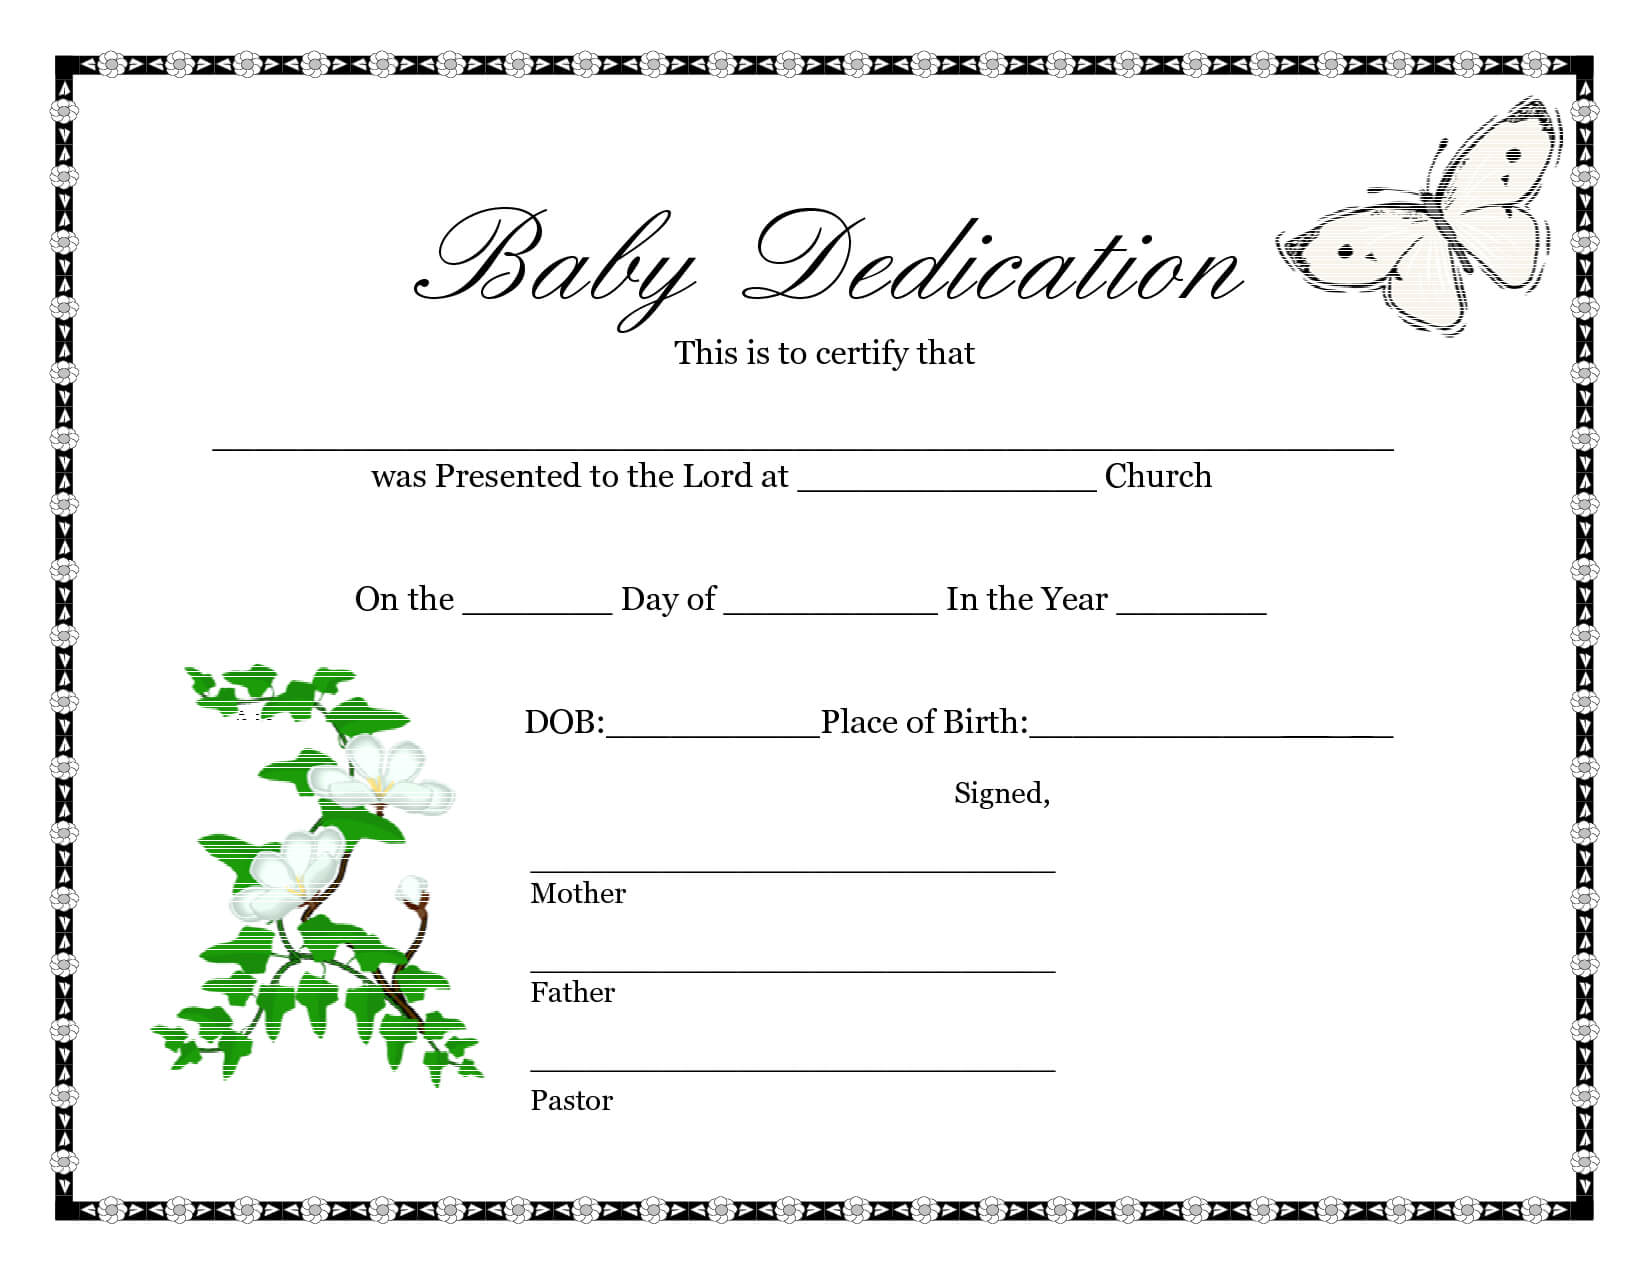 Downloadable Blank Birth Certificate Template Sample : V M D Intended For Official Birth Certificate Template